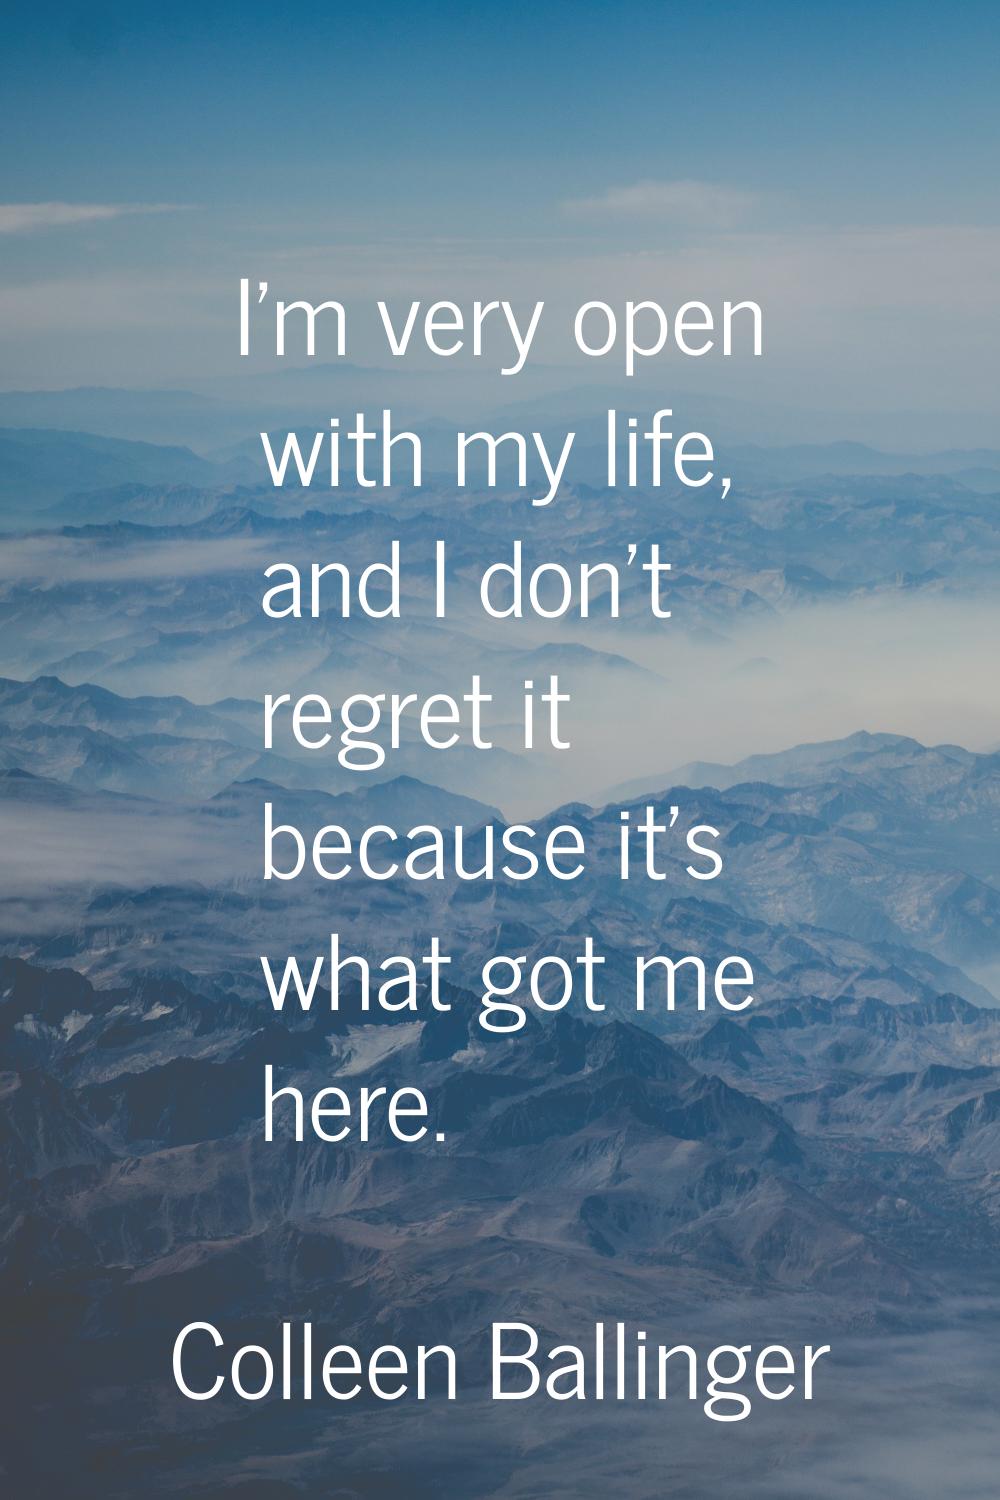 I'm very open with my life, and I don't regret it because it's what got me here.